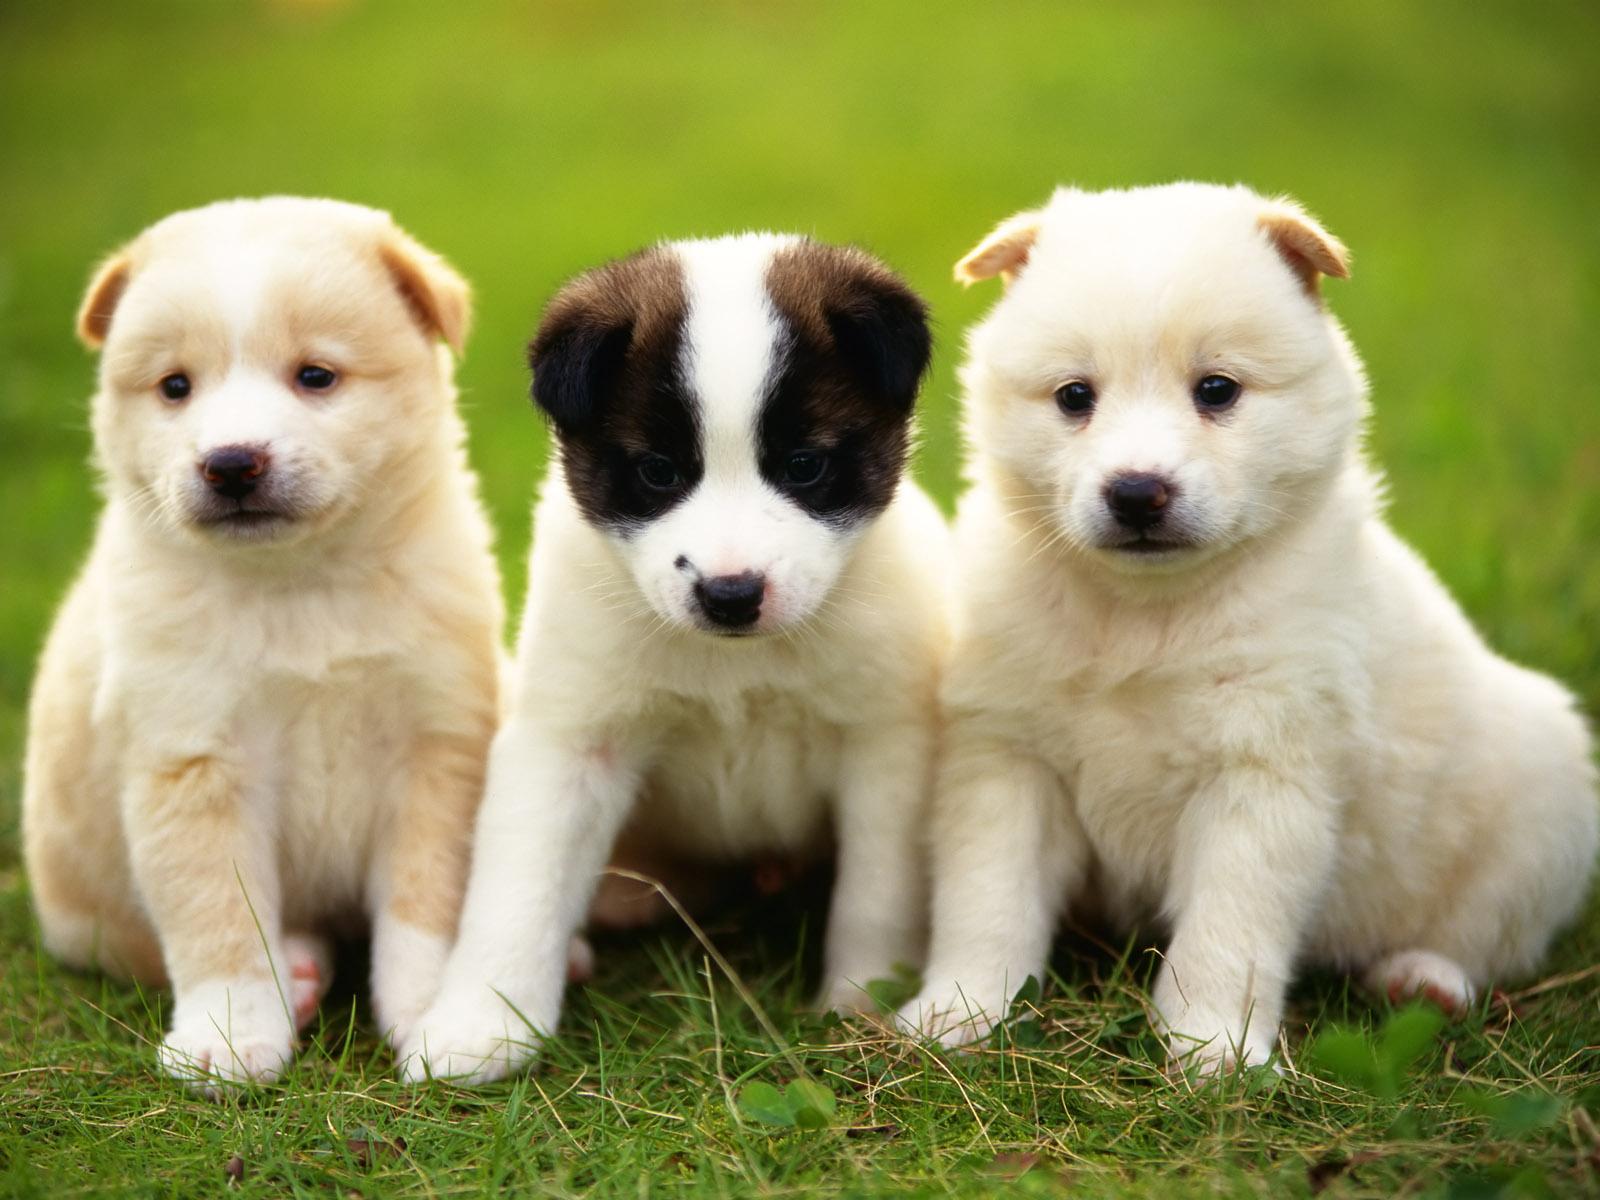 Mobile Desktop Background Baby Dogs Pics Cute Download